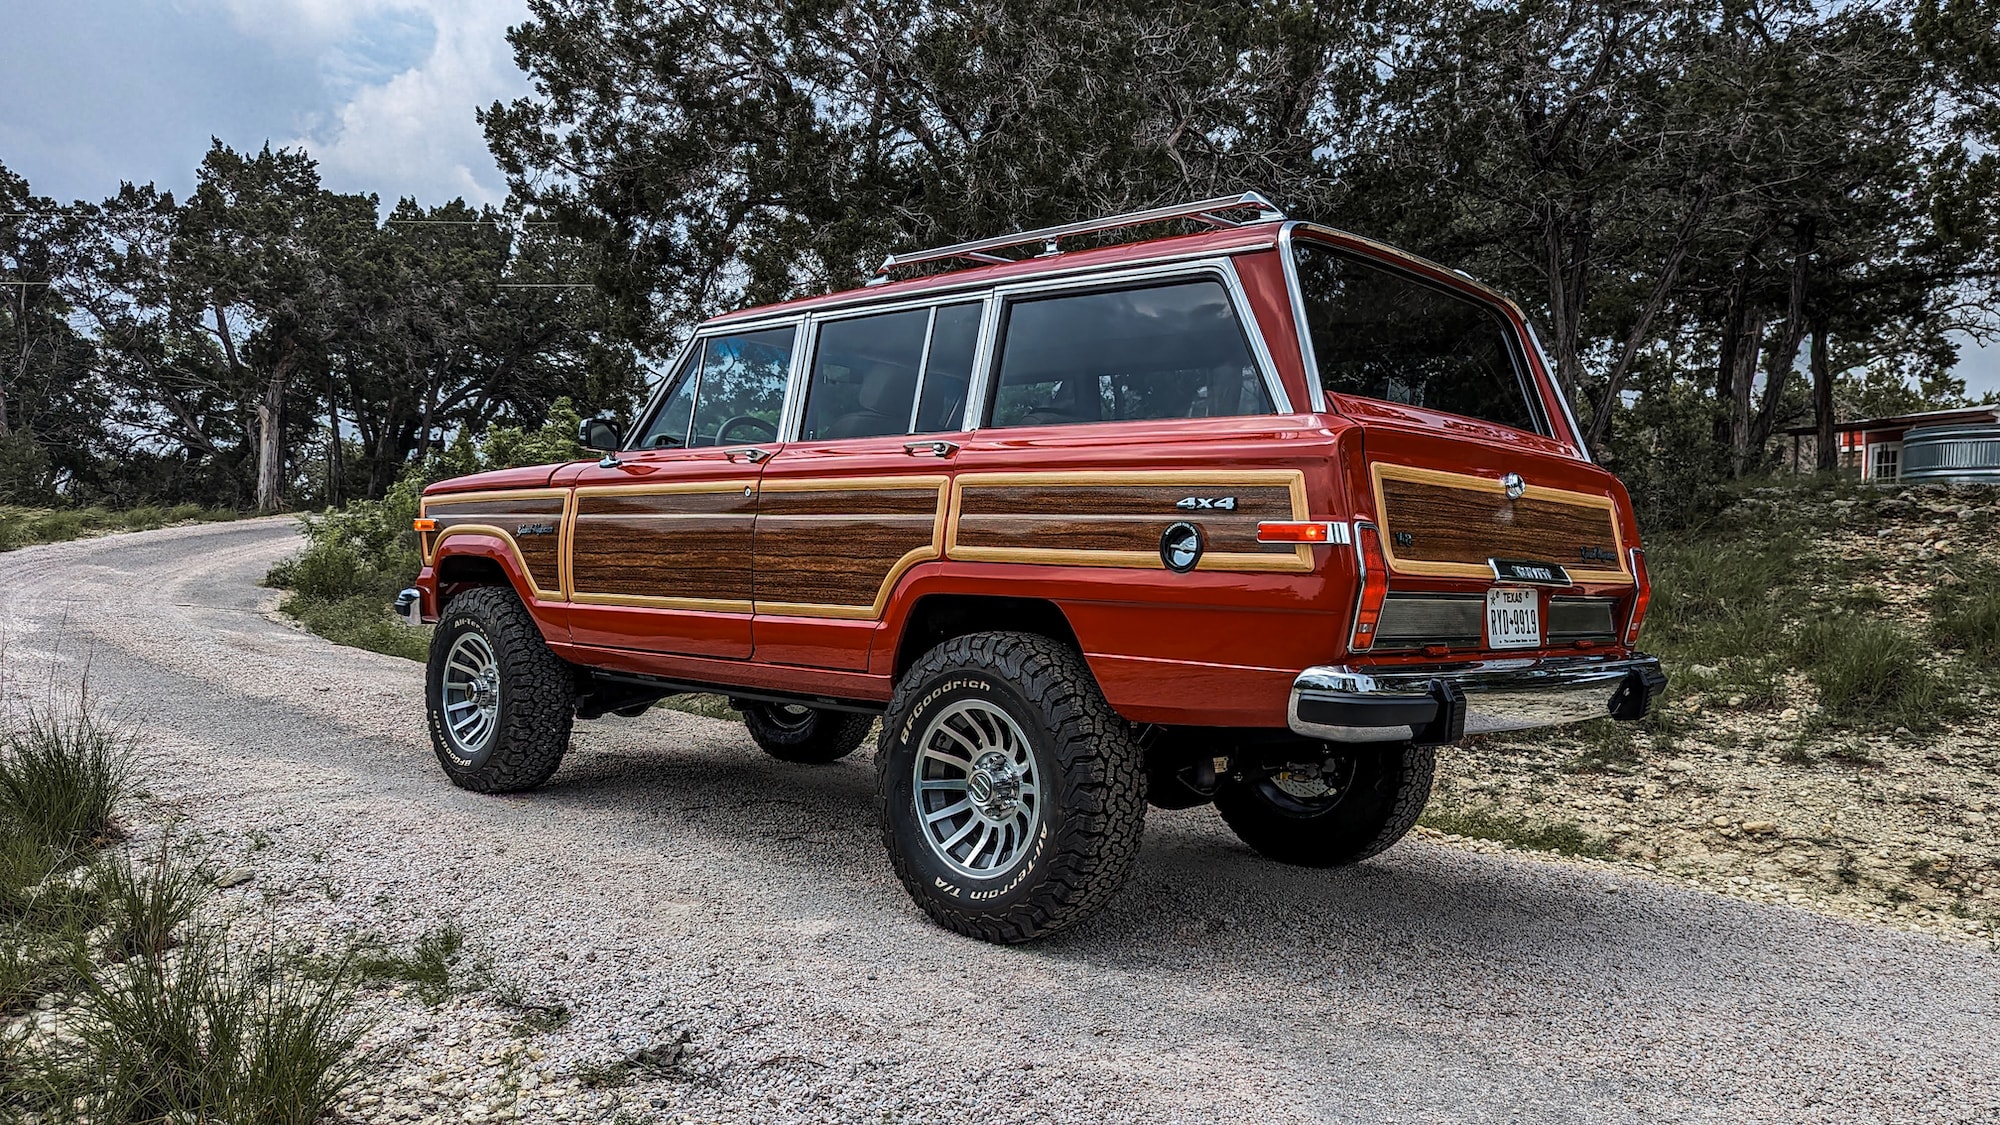 1988 Jeep Grand Wagoneer Restored with 807 HP